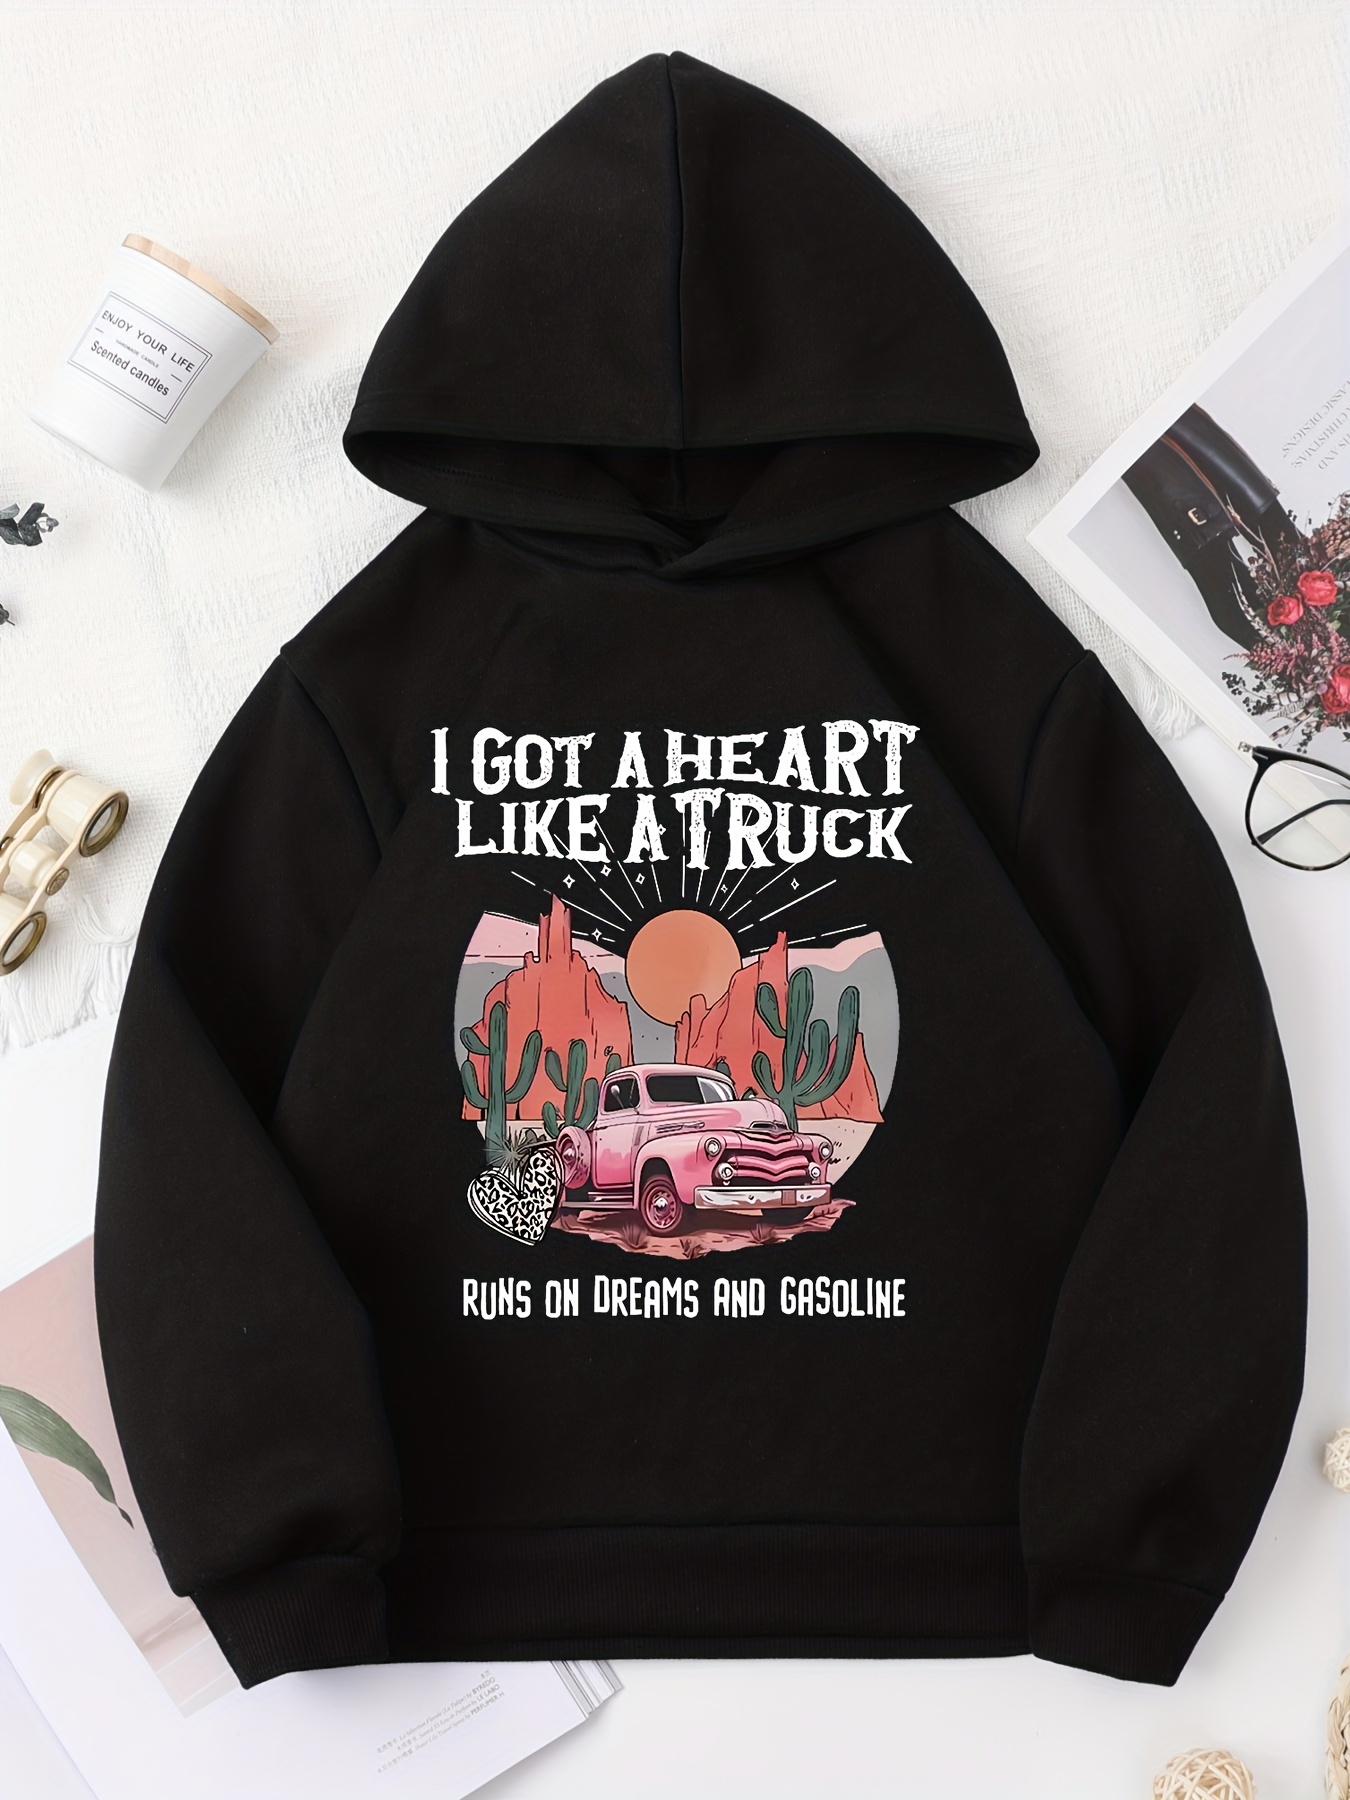 'I Got A Heart Like A Truck' Print Hoodie For Girls, Girl's Casual Graphic Design Pullover Hooded Sweatshirt Streetwear For Winter Fall, As Gifts